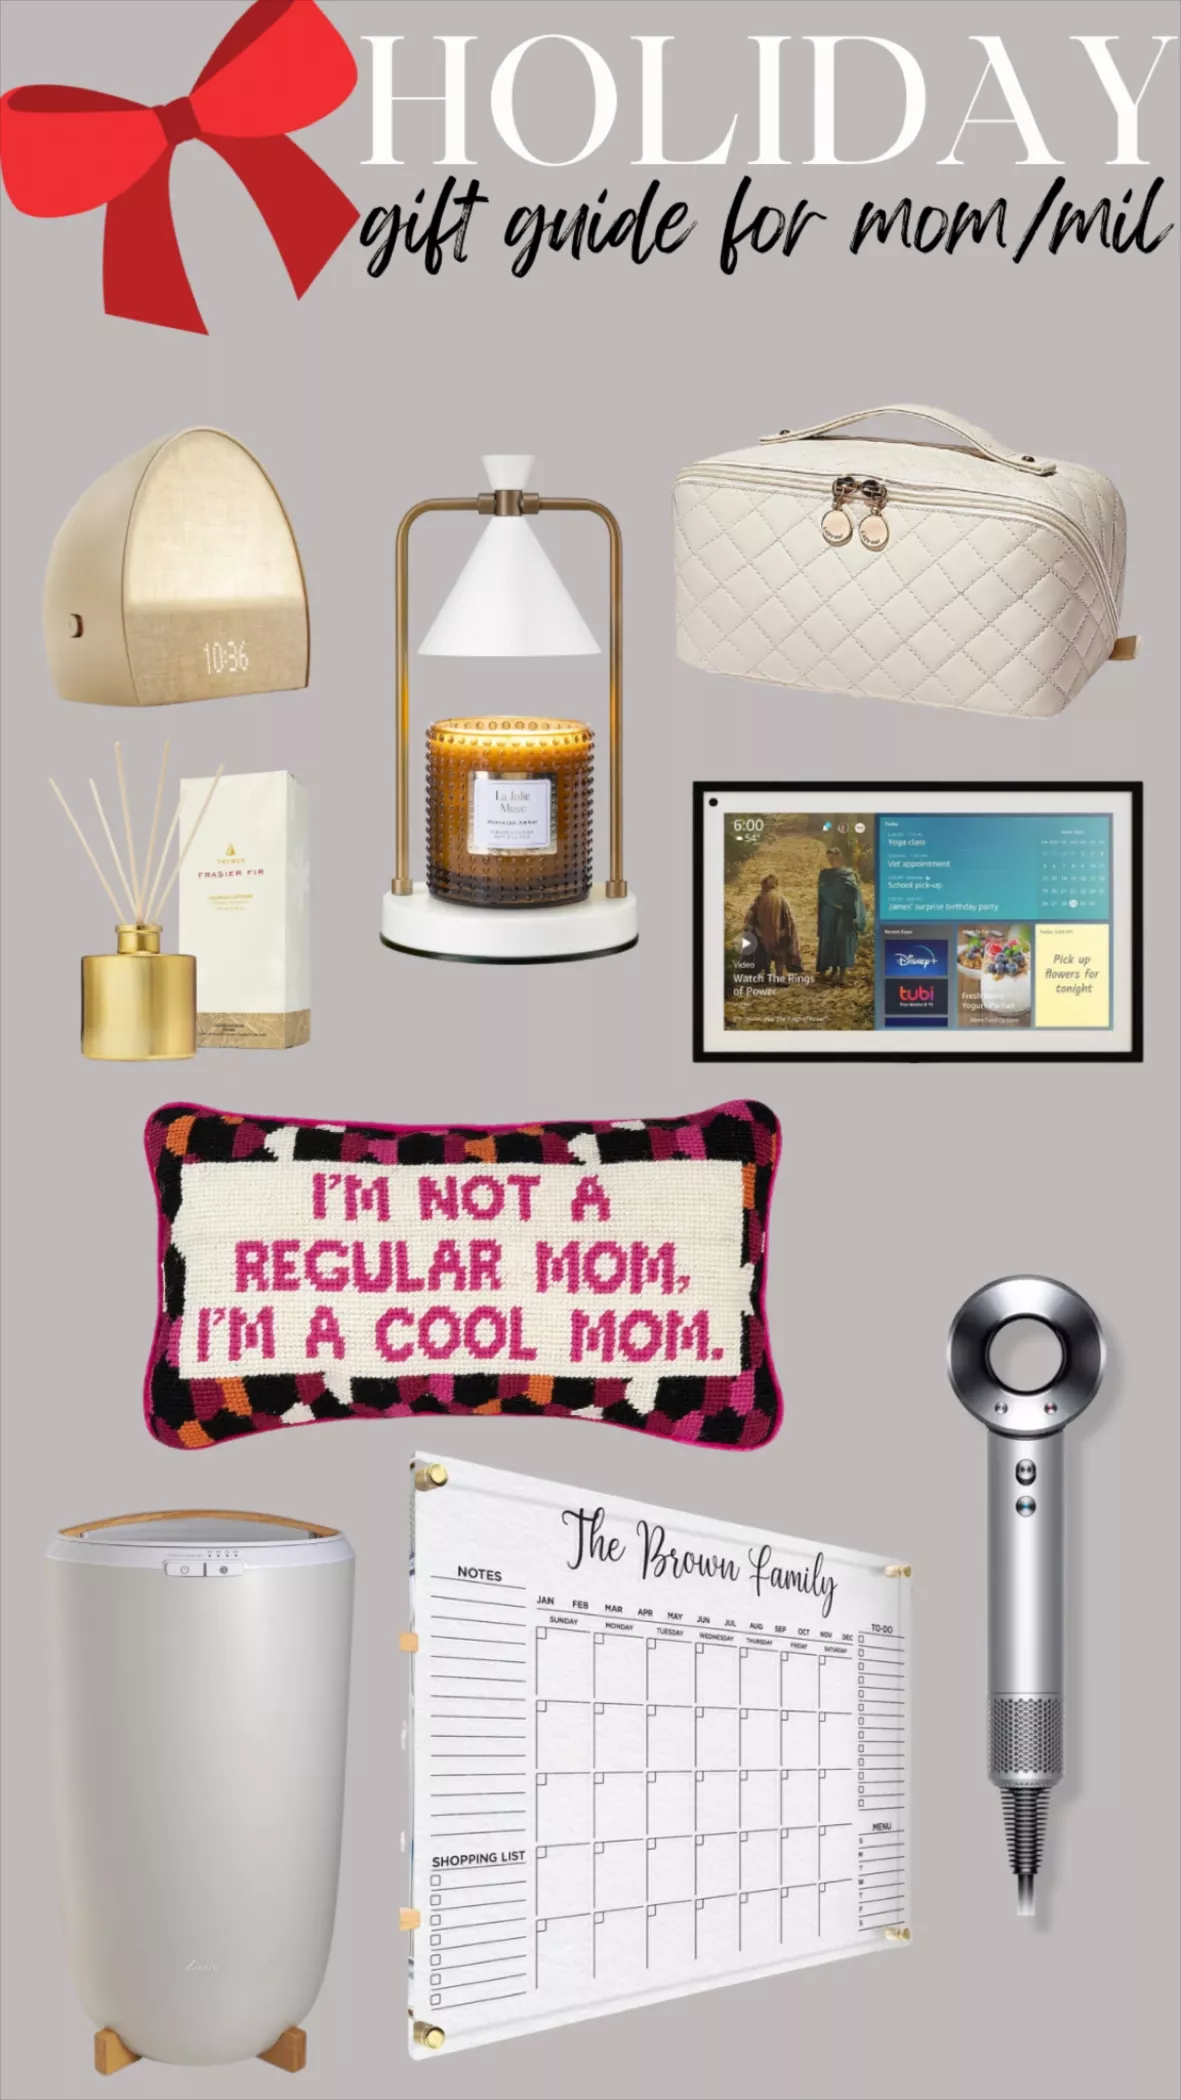 Holiday Gift Guide, For Mom + Mother-In-Law